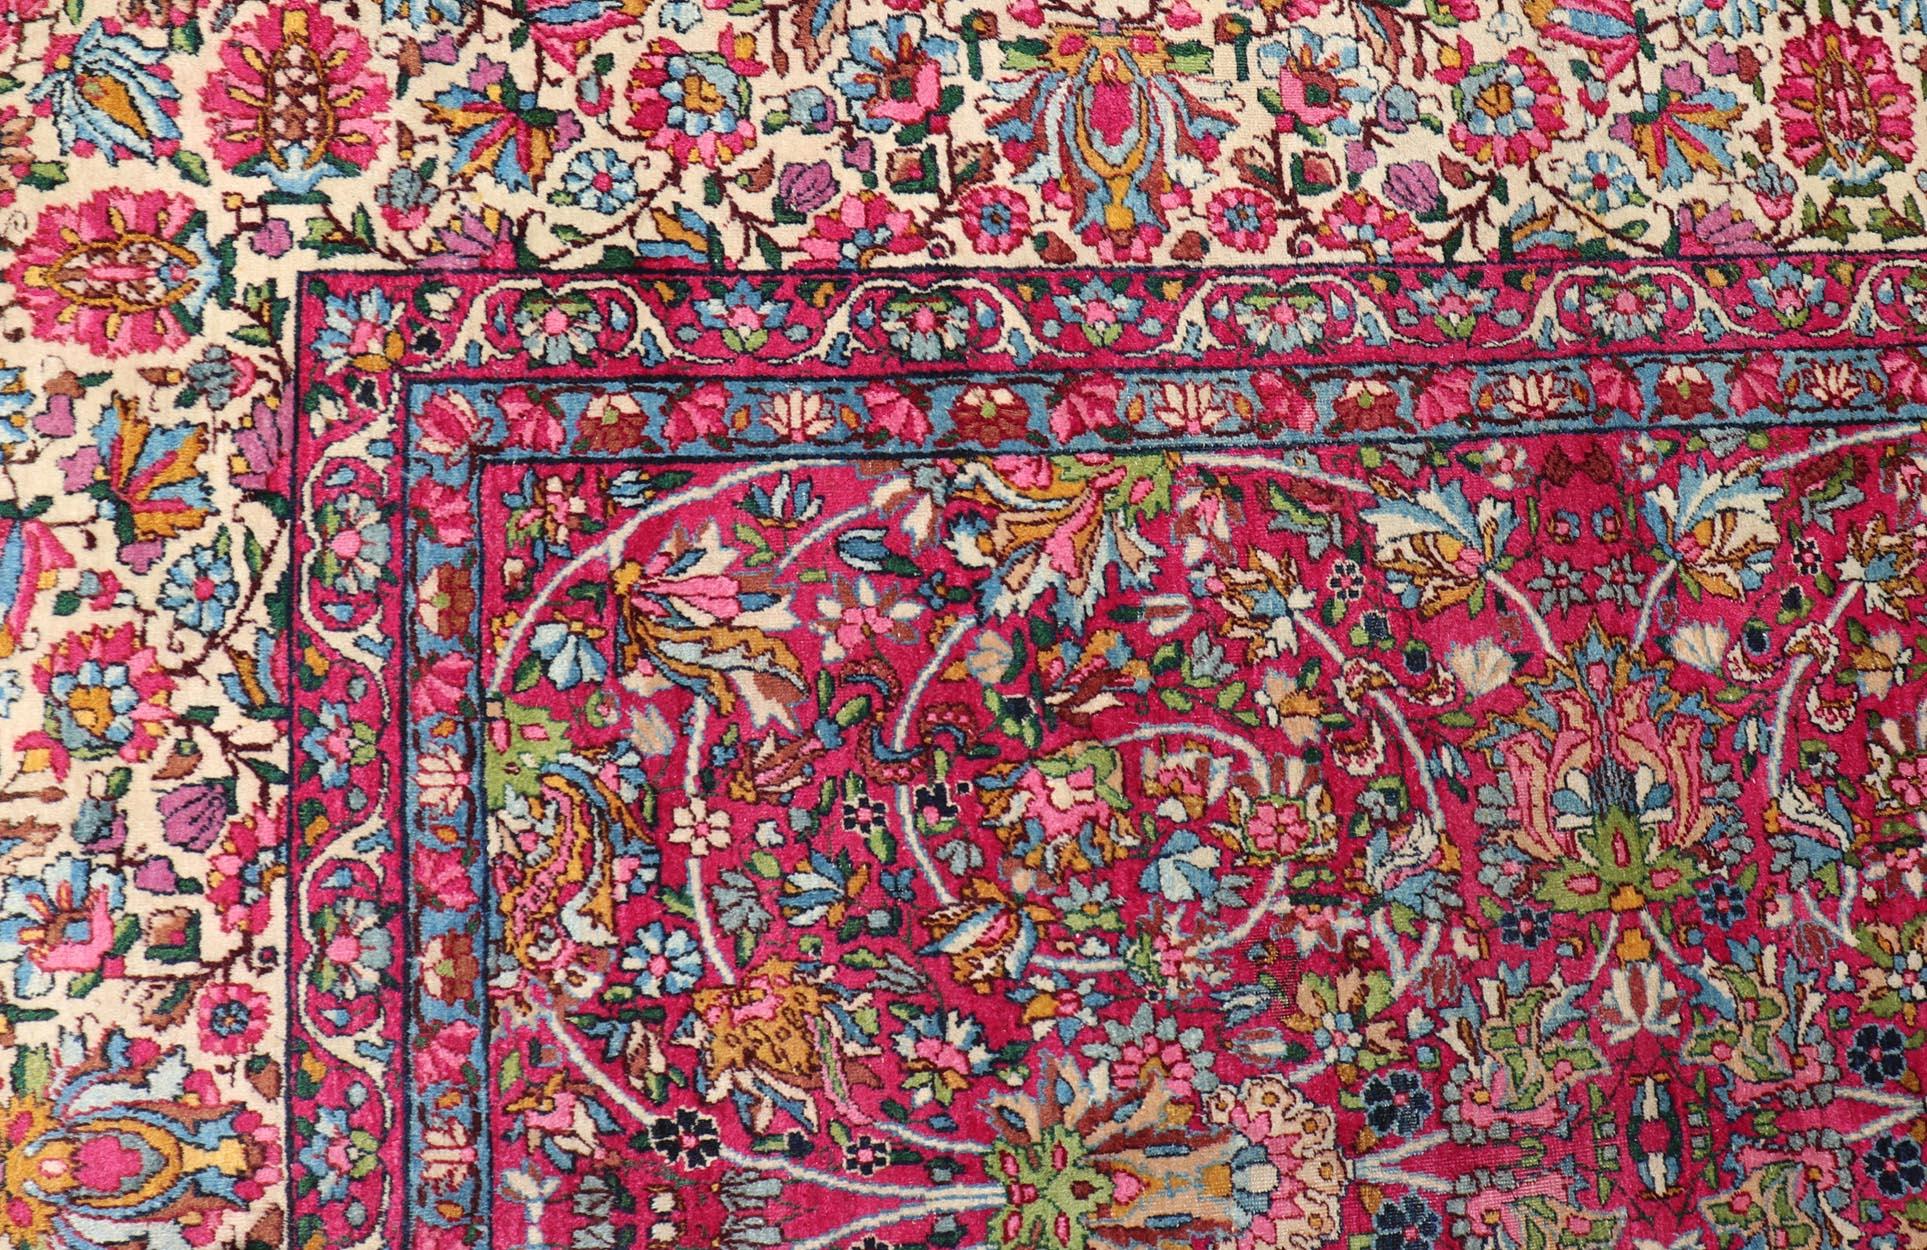  Antique Persian Lavar Kerman Rug with All-Over Floral Design In Jewel Tones  In Good Condition For Sale In Atlanta, GA